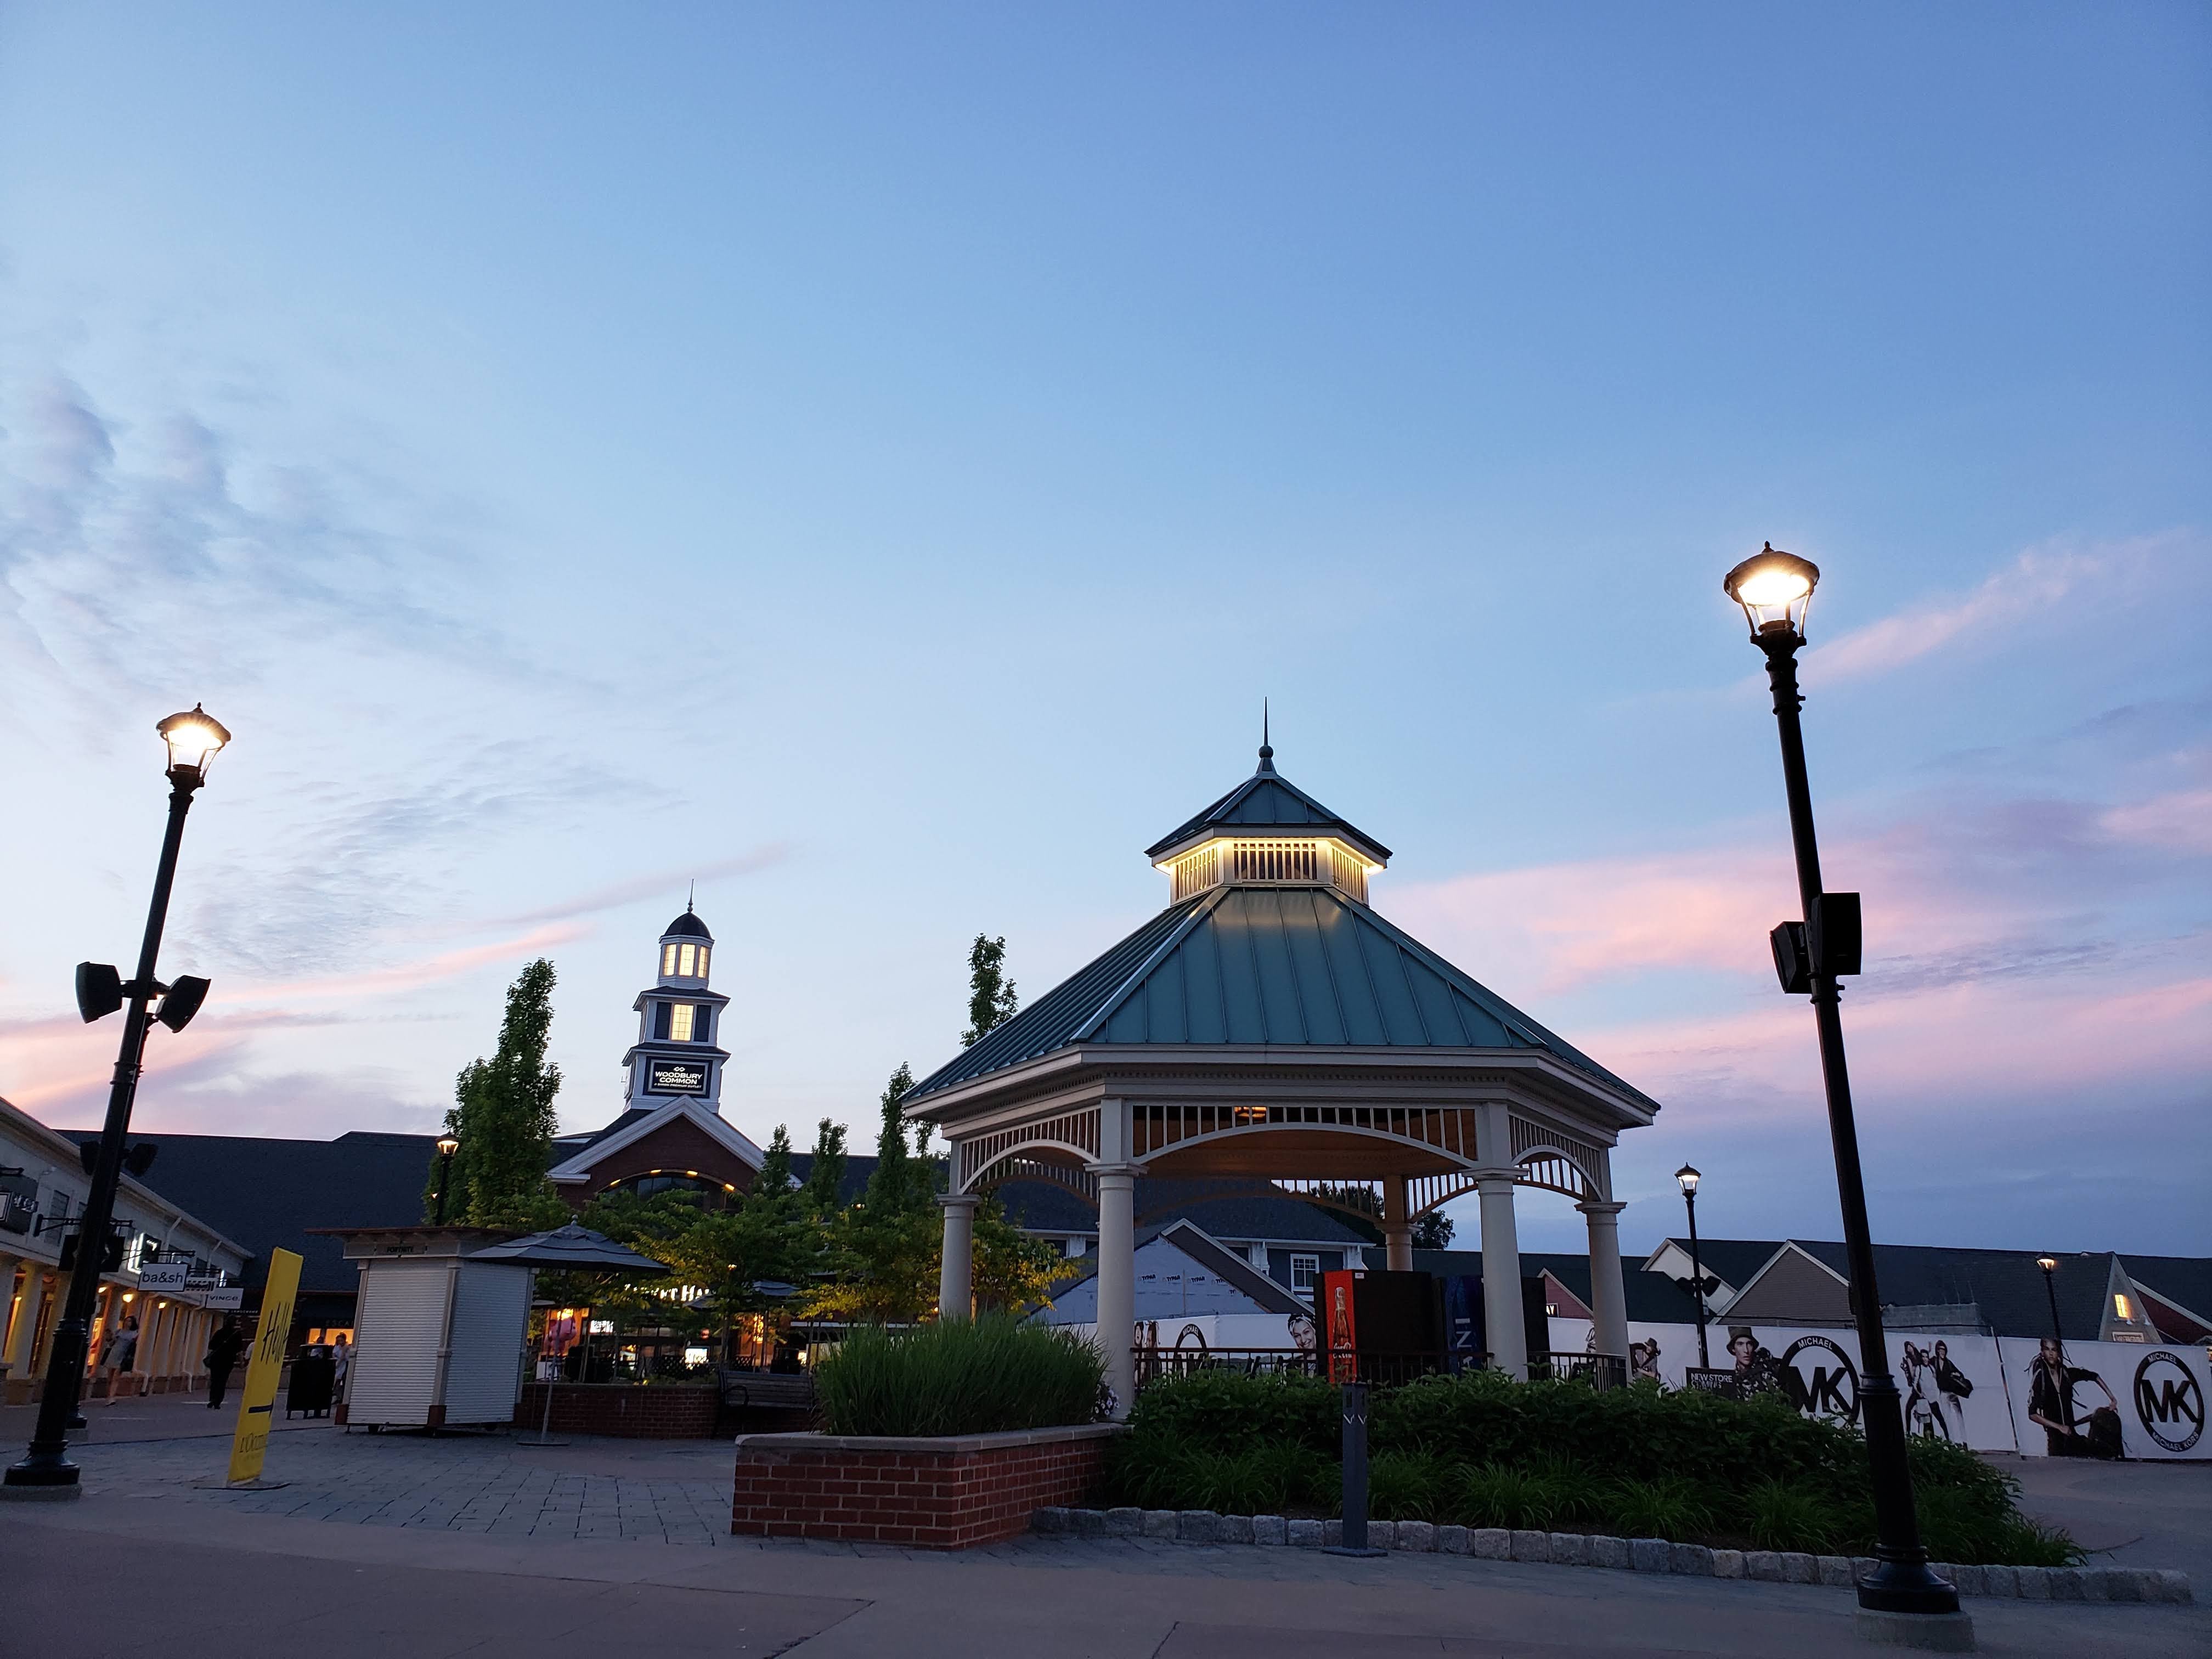 woodbury common premium outlets new york